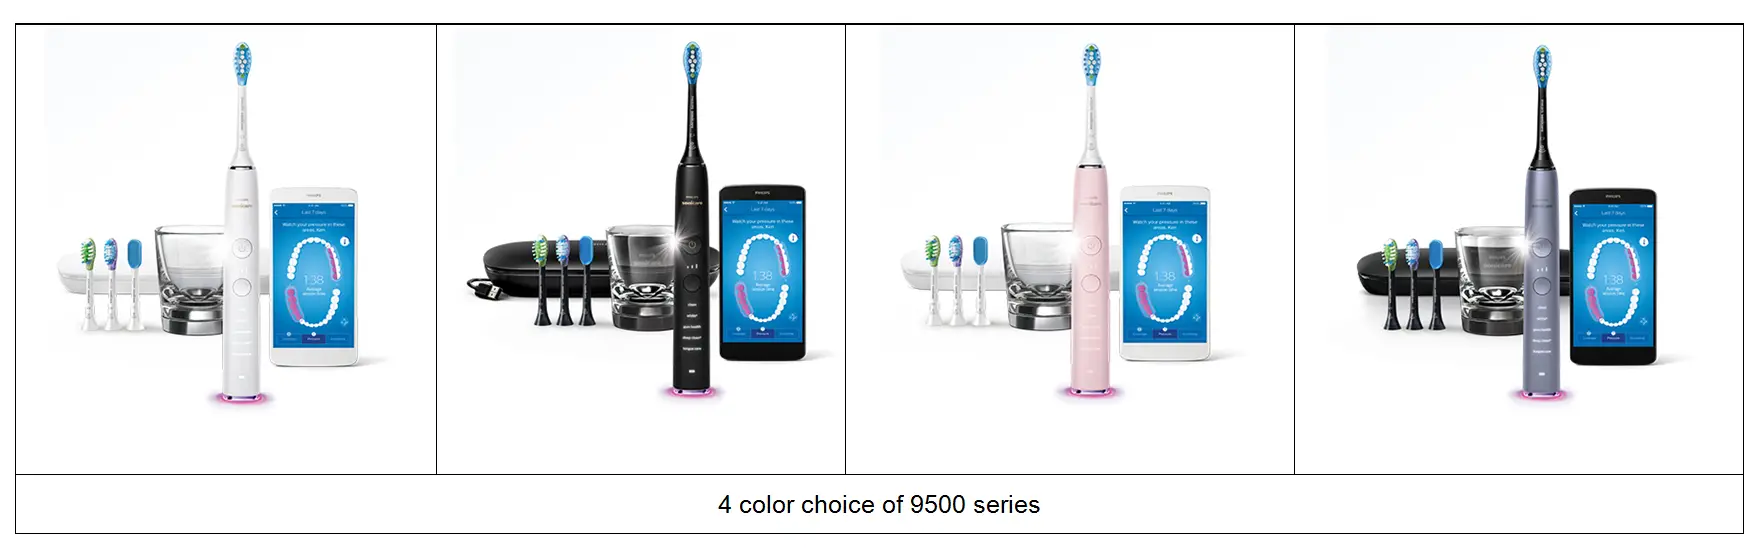 4 color choice of 9500 series